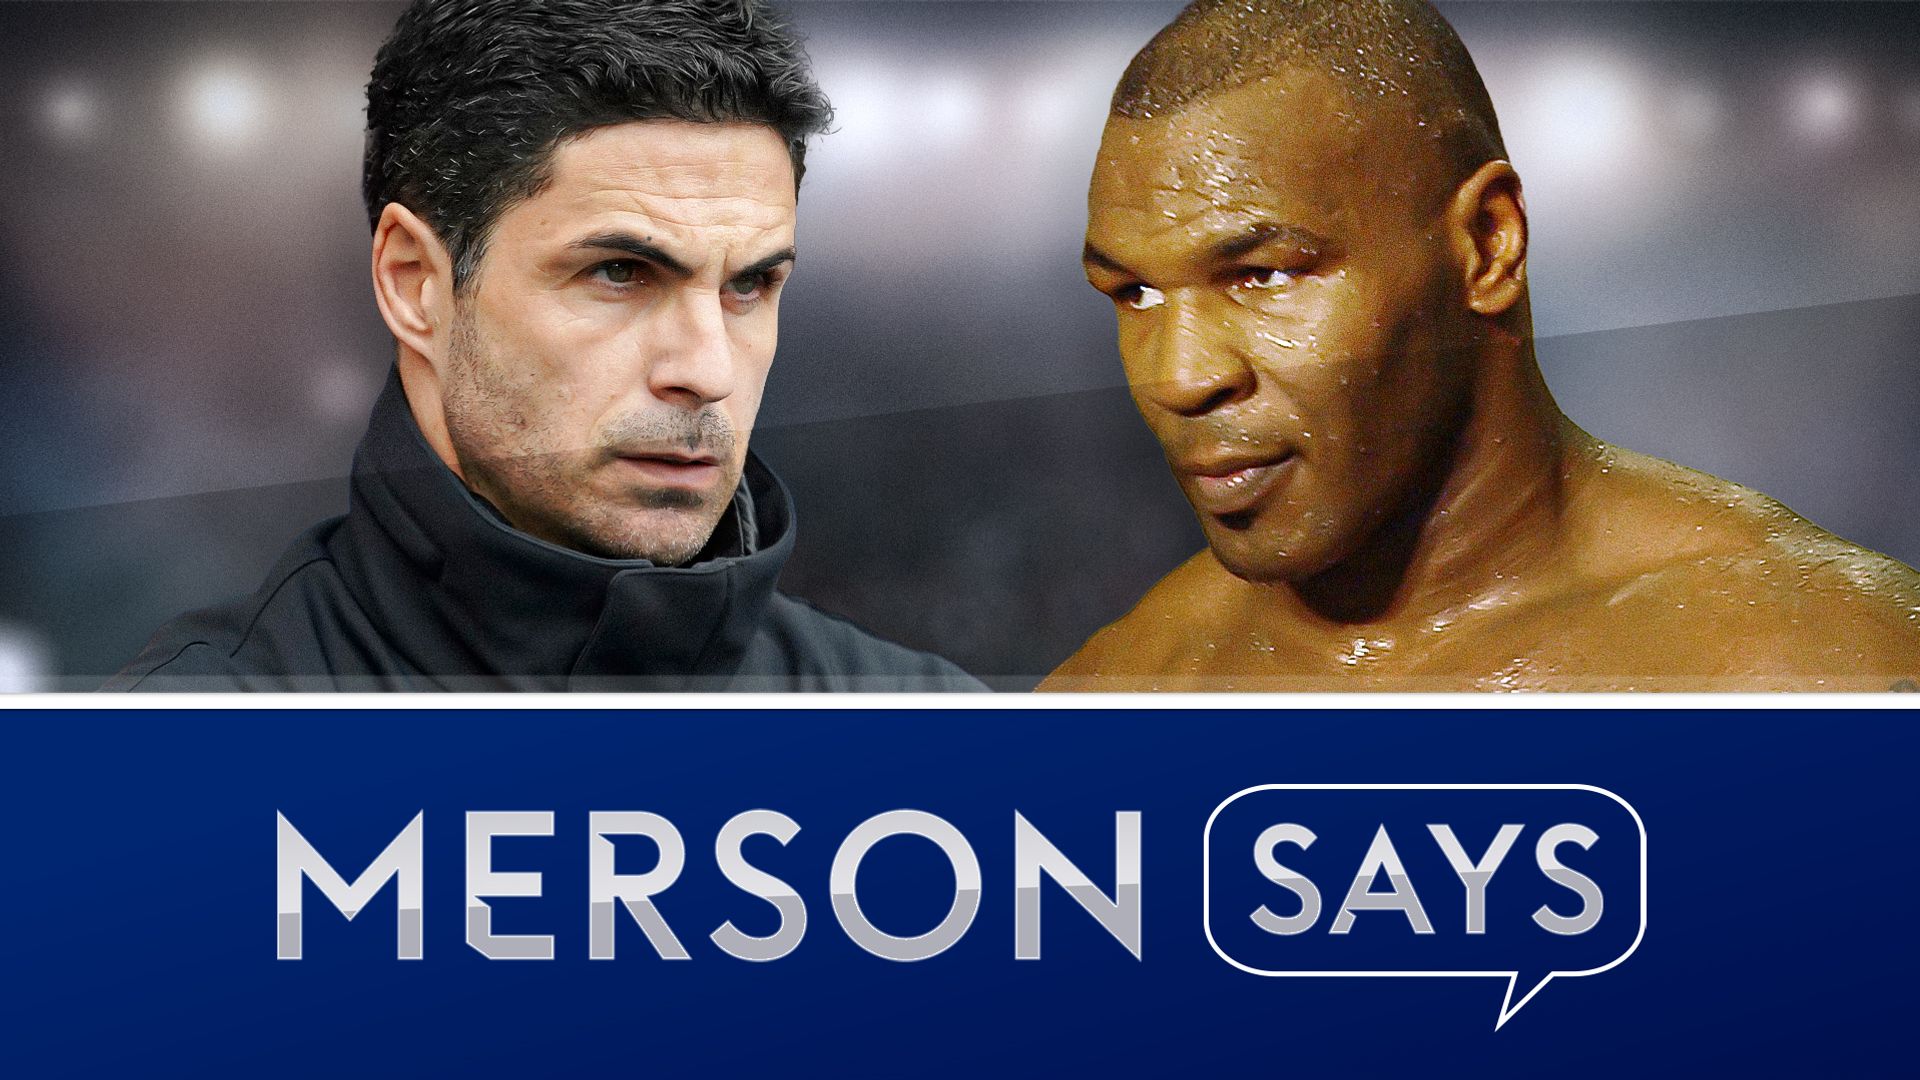 Merson Says: Give Arteta credit, he's up against Mike Tyson!